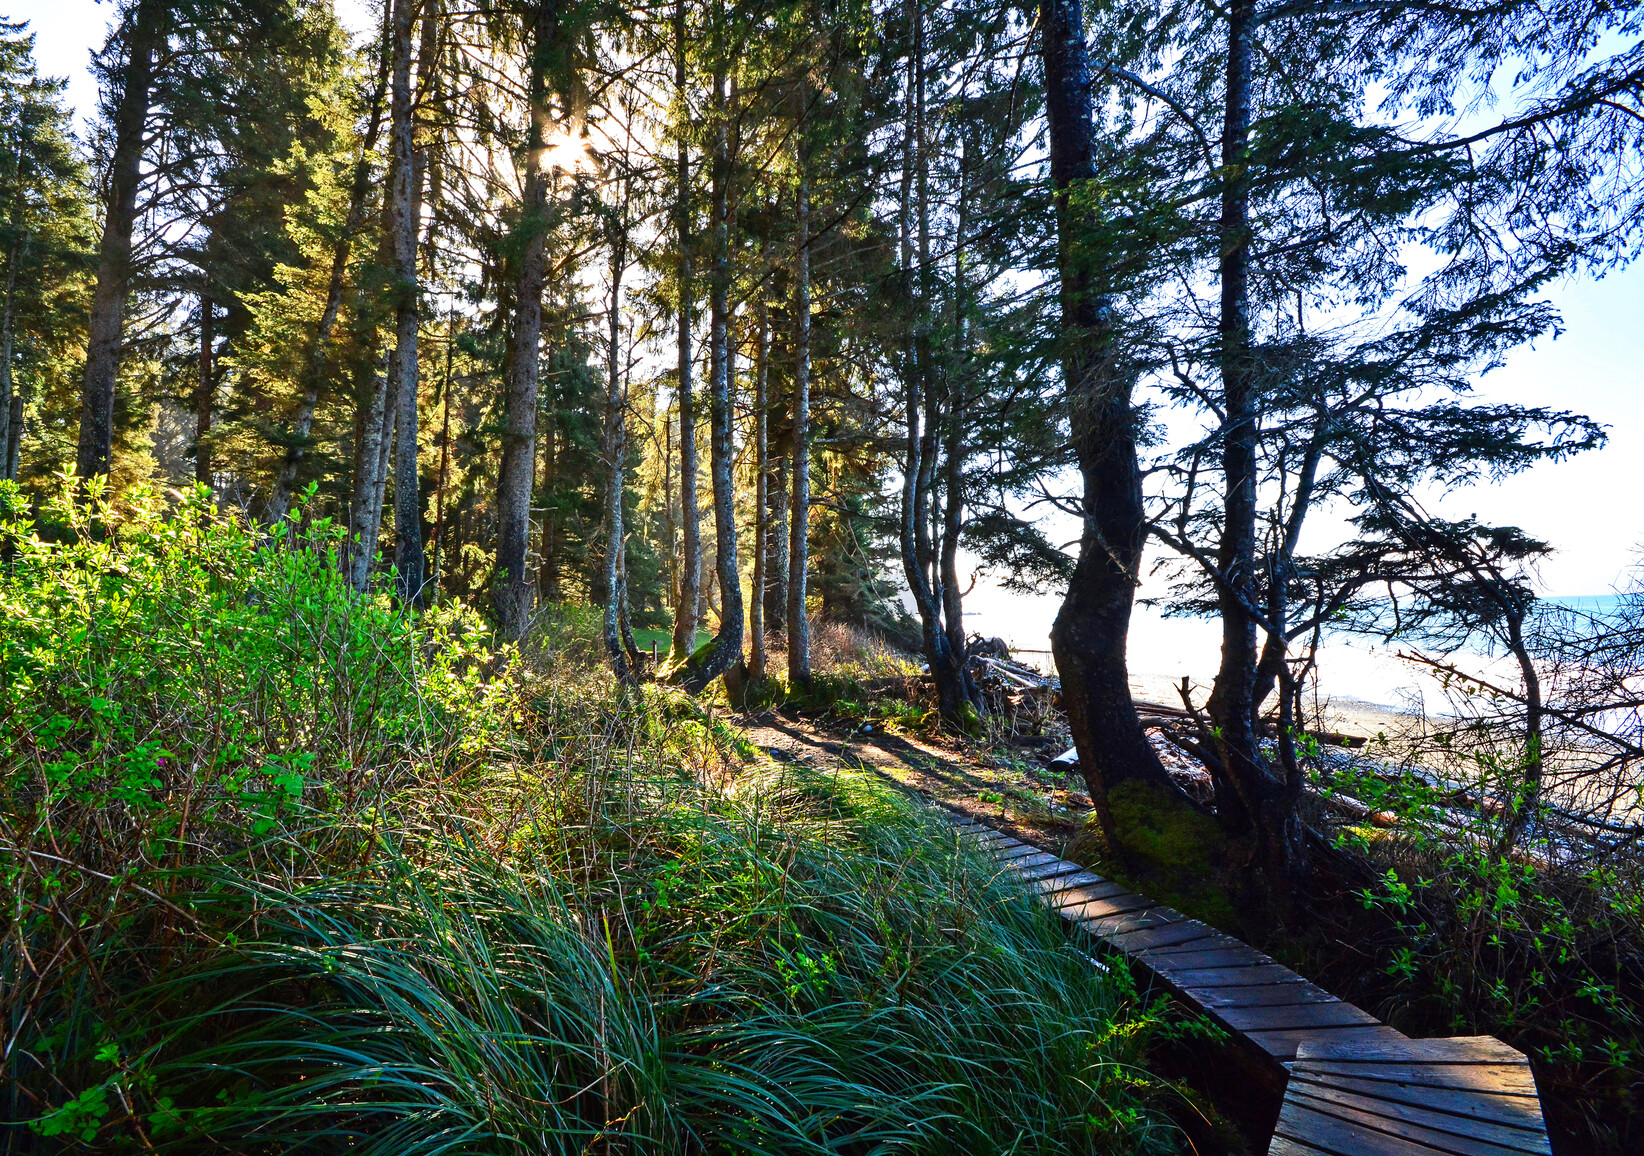 Trail and boardwalk in forest beside the beach.